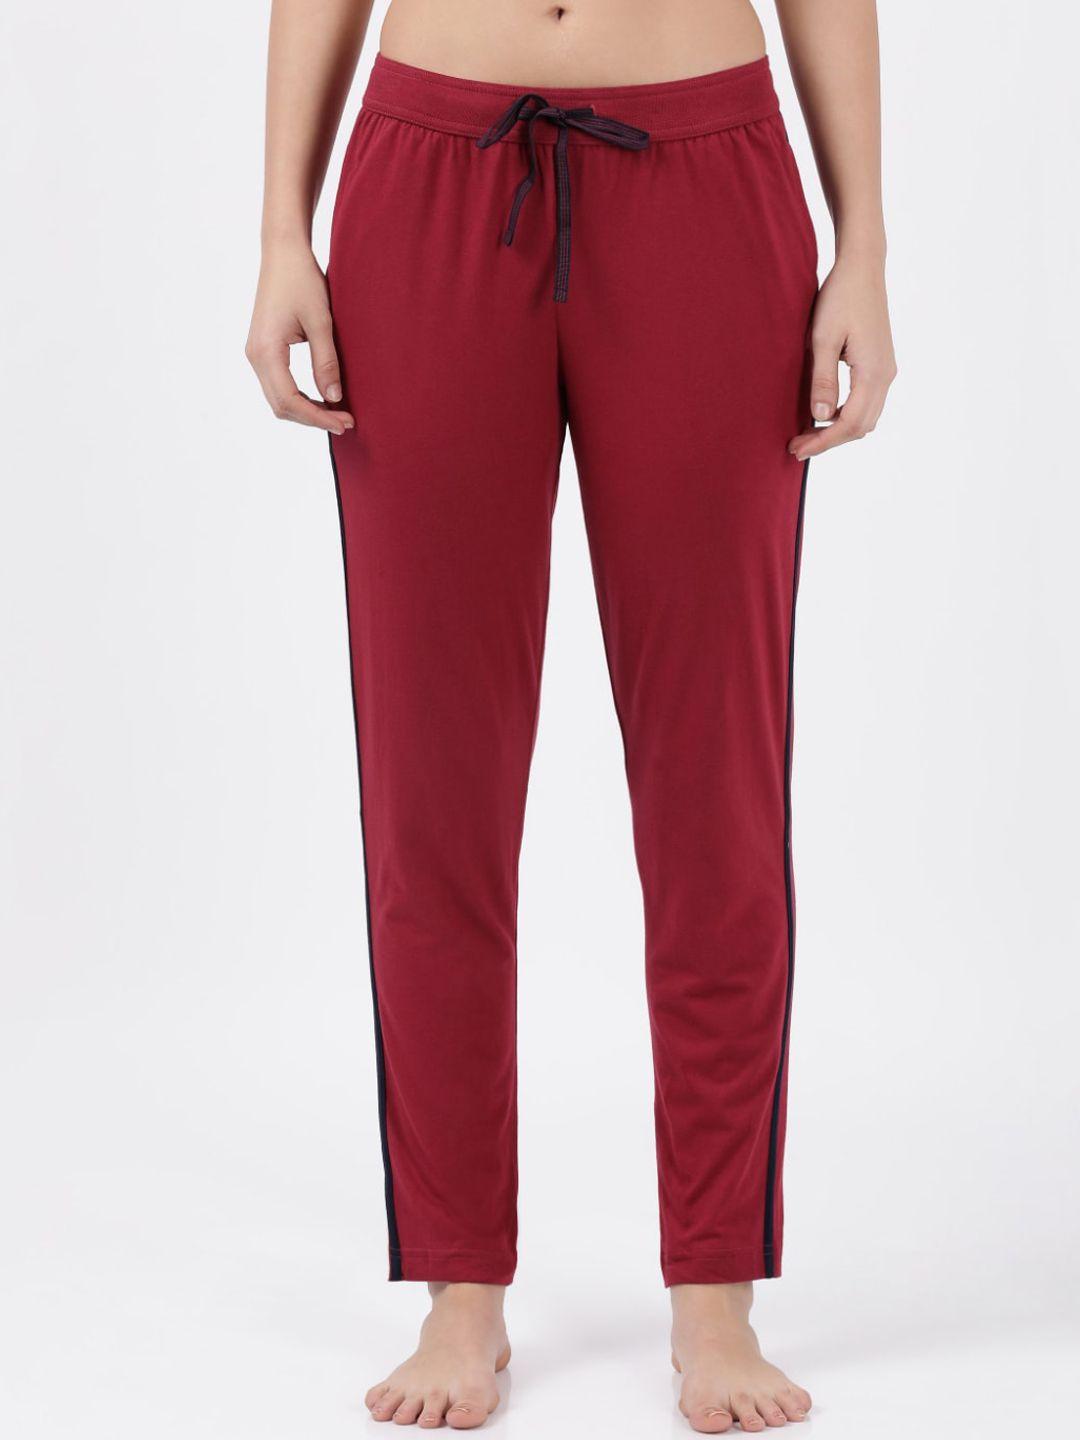 jockey-women-red-solid-relaxed-fit-yoga-track-pant